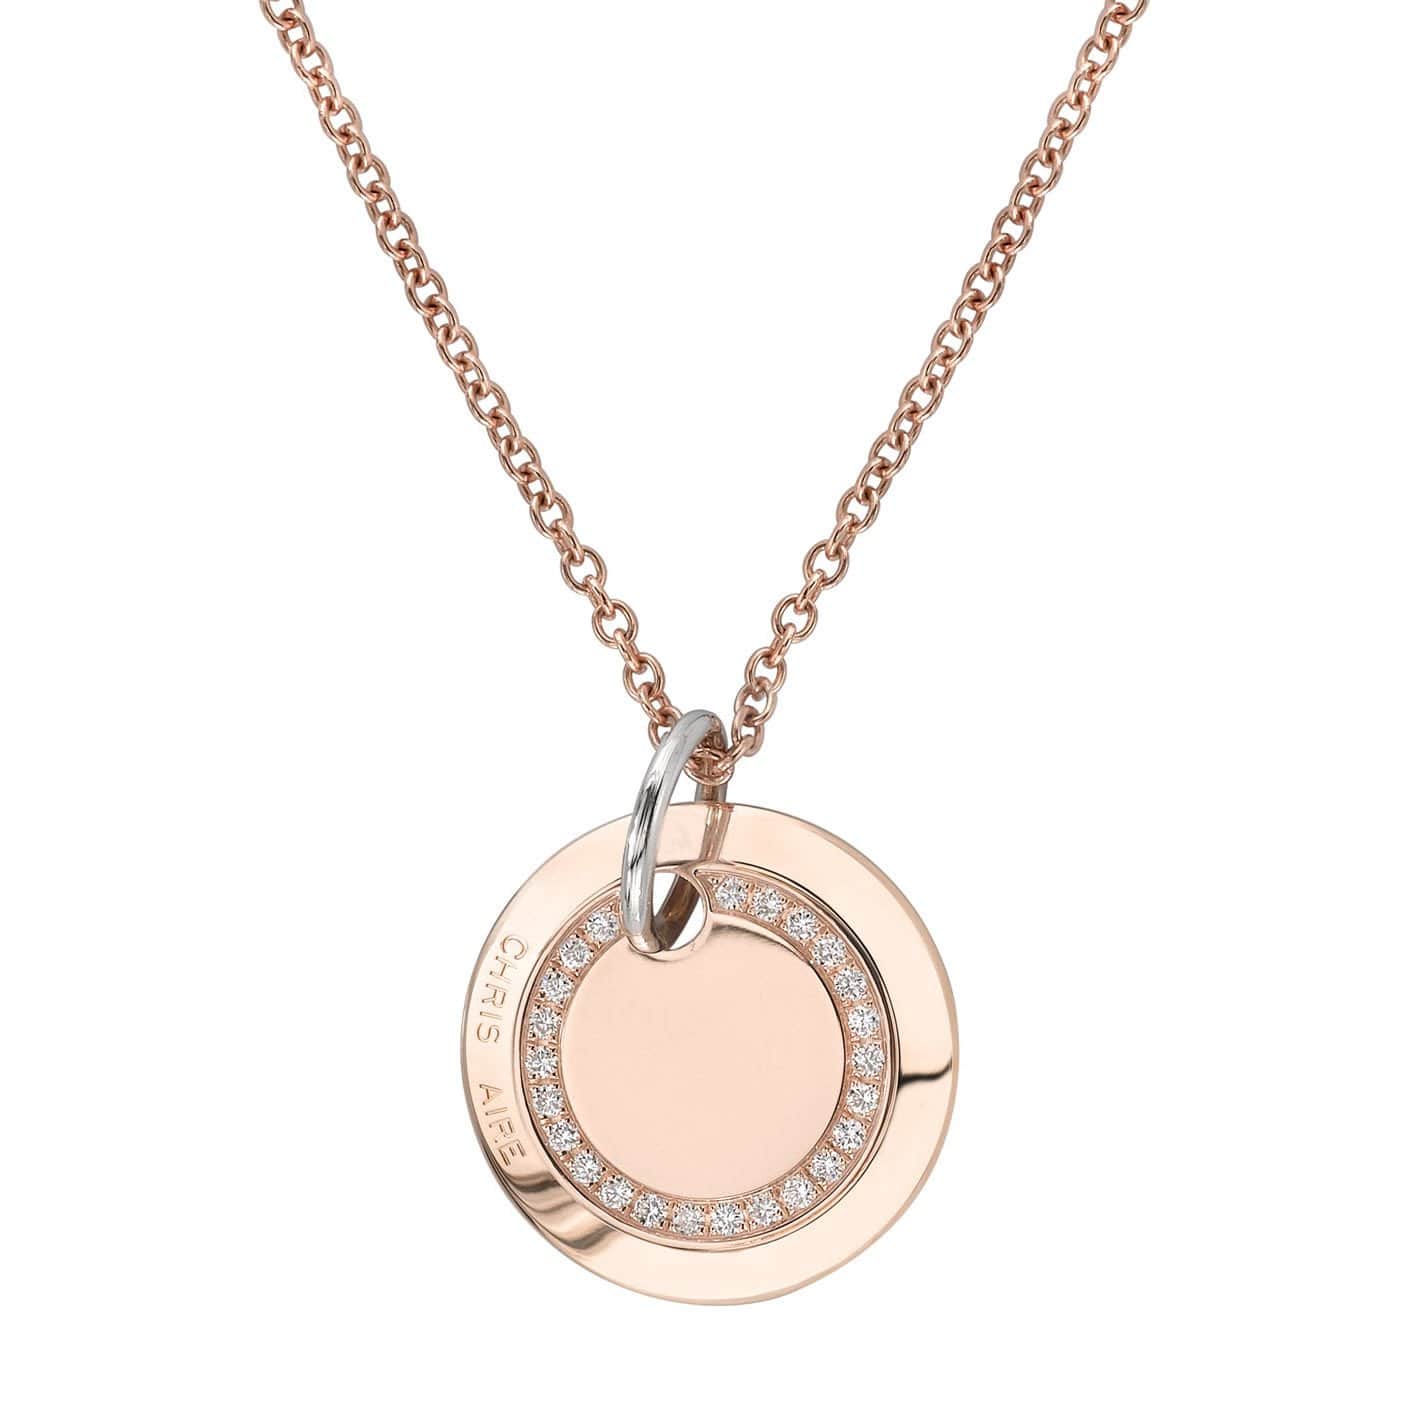 DIAMOND NECKLACE - "ETERNITY TAG" - Chris Aire Fine Jewelry & Timepieces